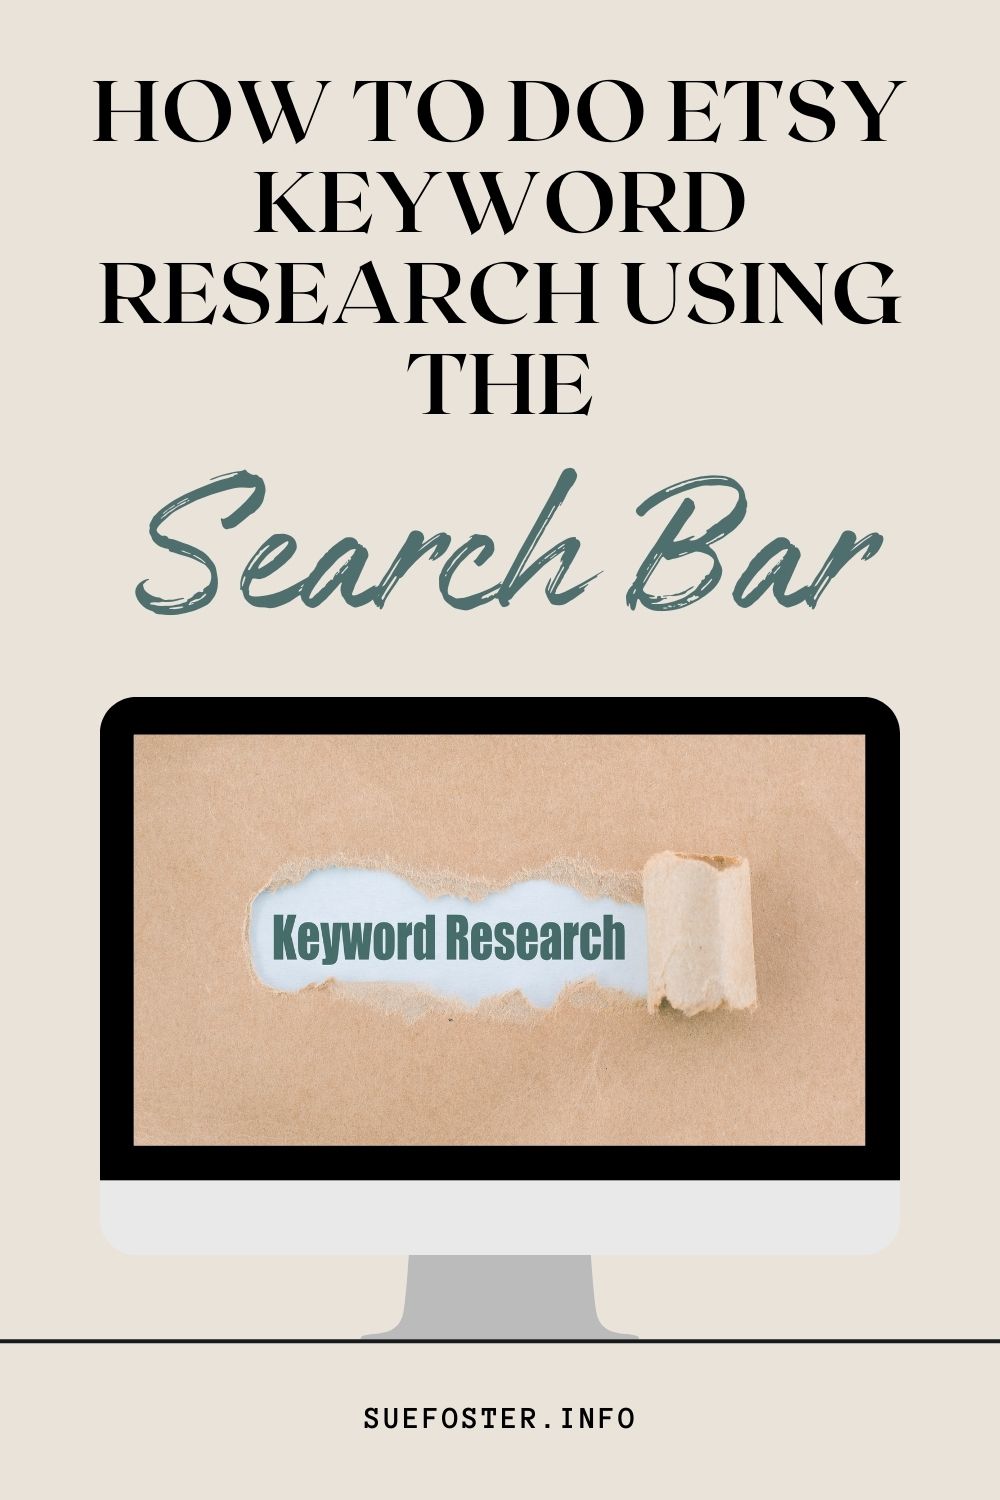 Etsy seller’s guide to keyword research. Learn to use the Etsy search bar effectively, optimise your listings, and boost your sales.